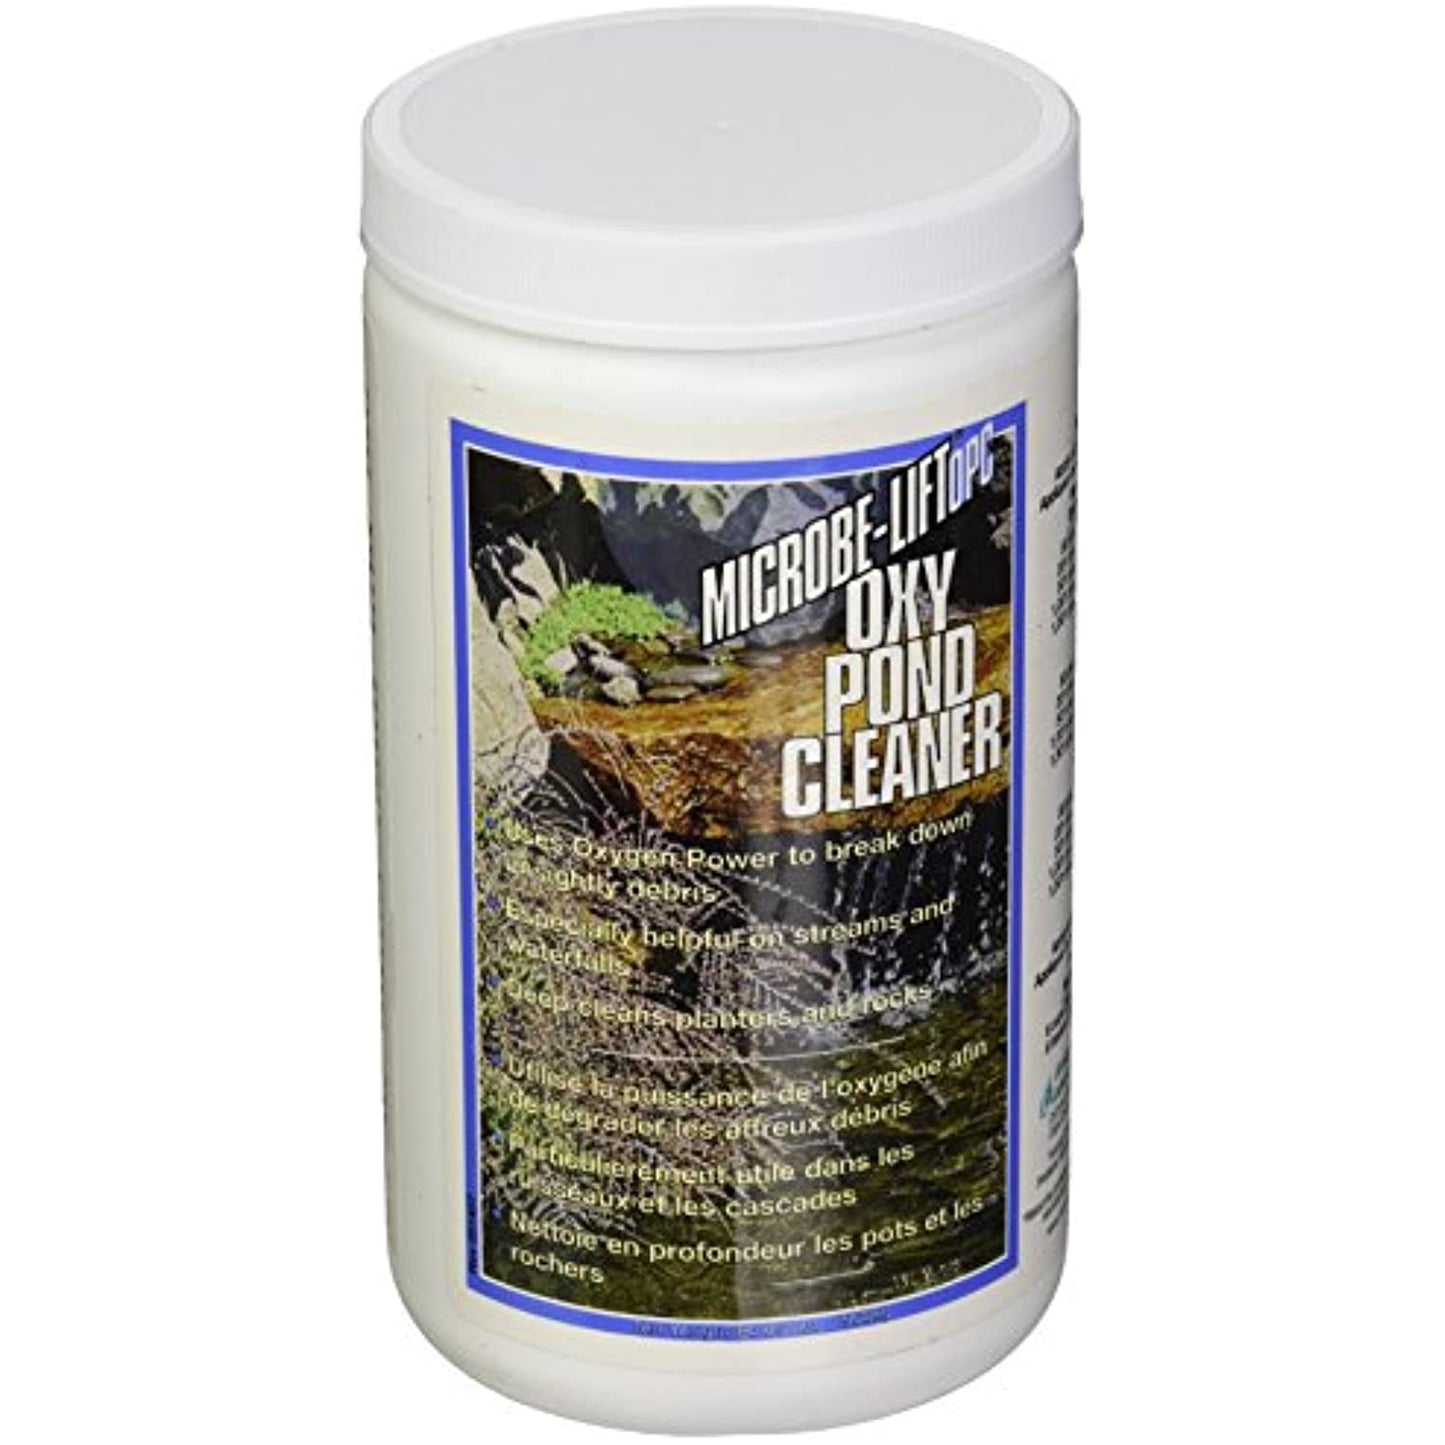 Microbe Lift Oxy Pond Cleaner, 2lb